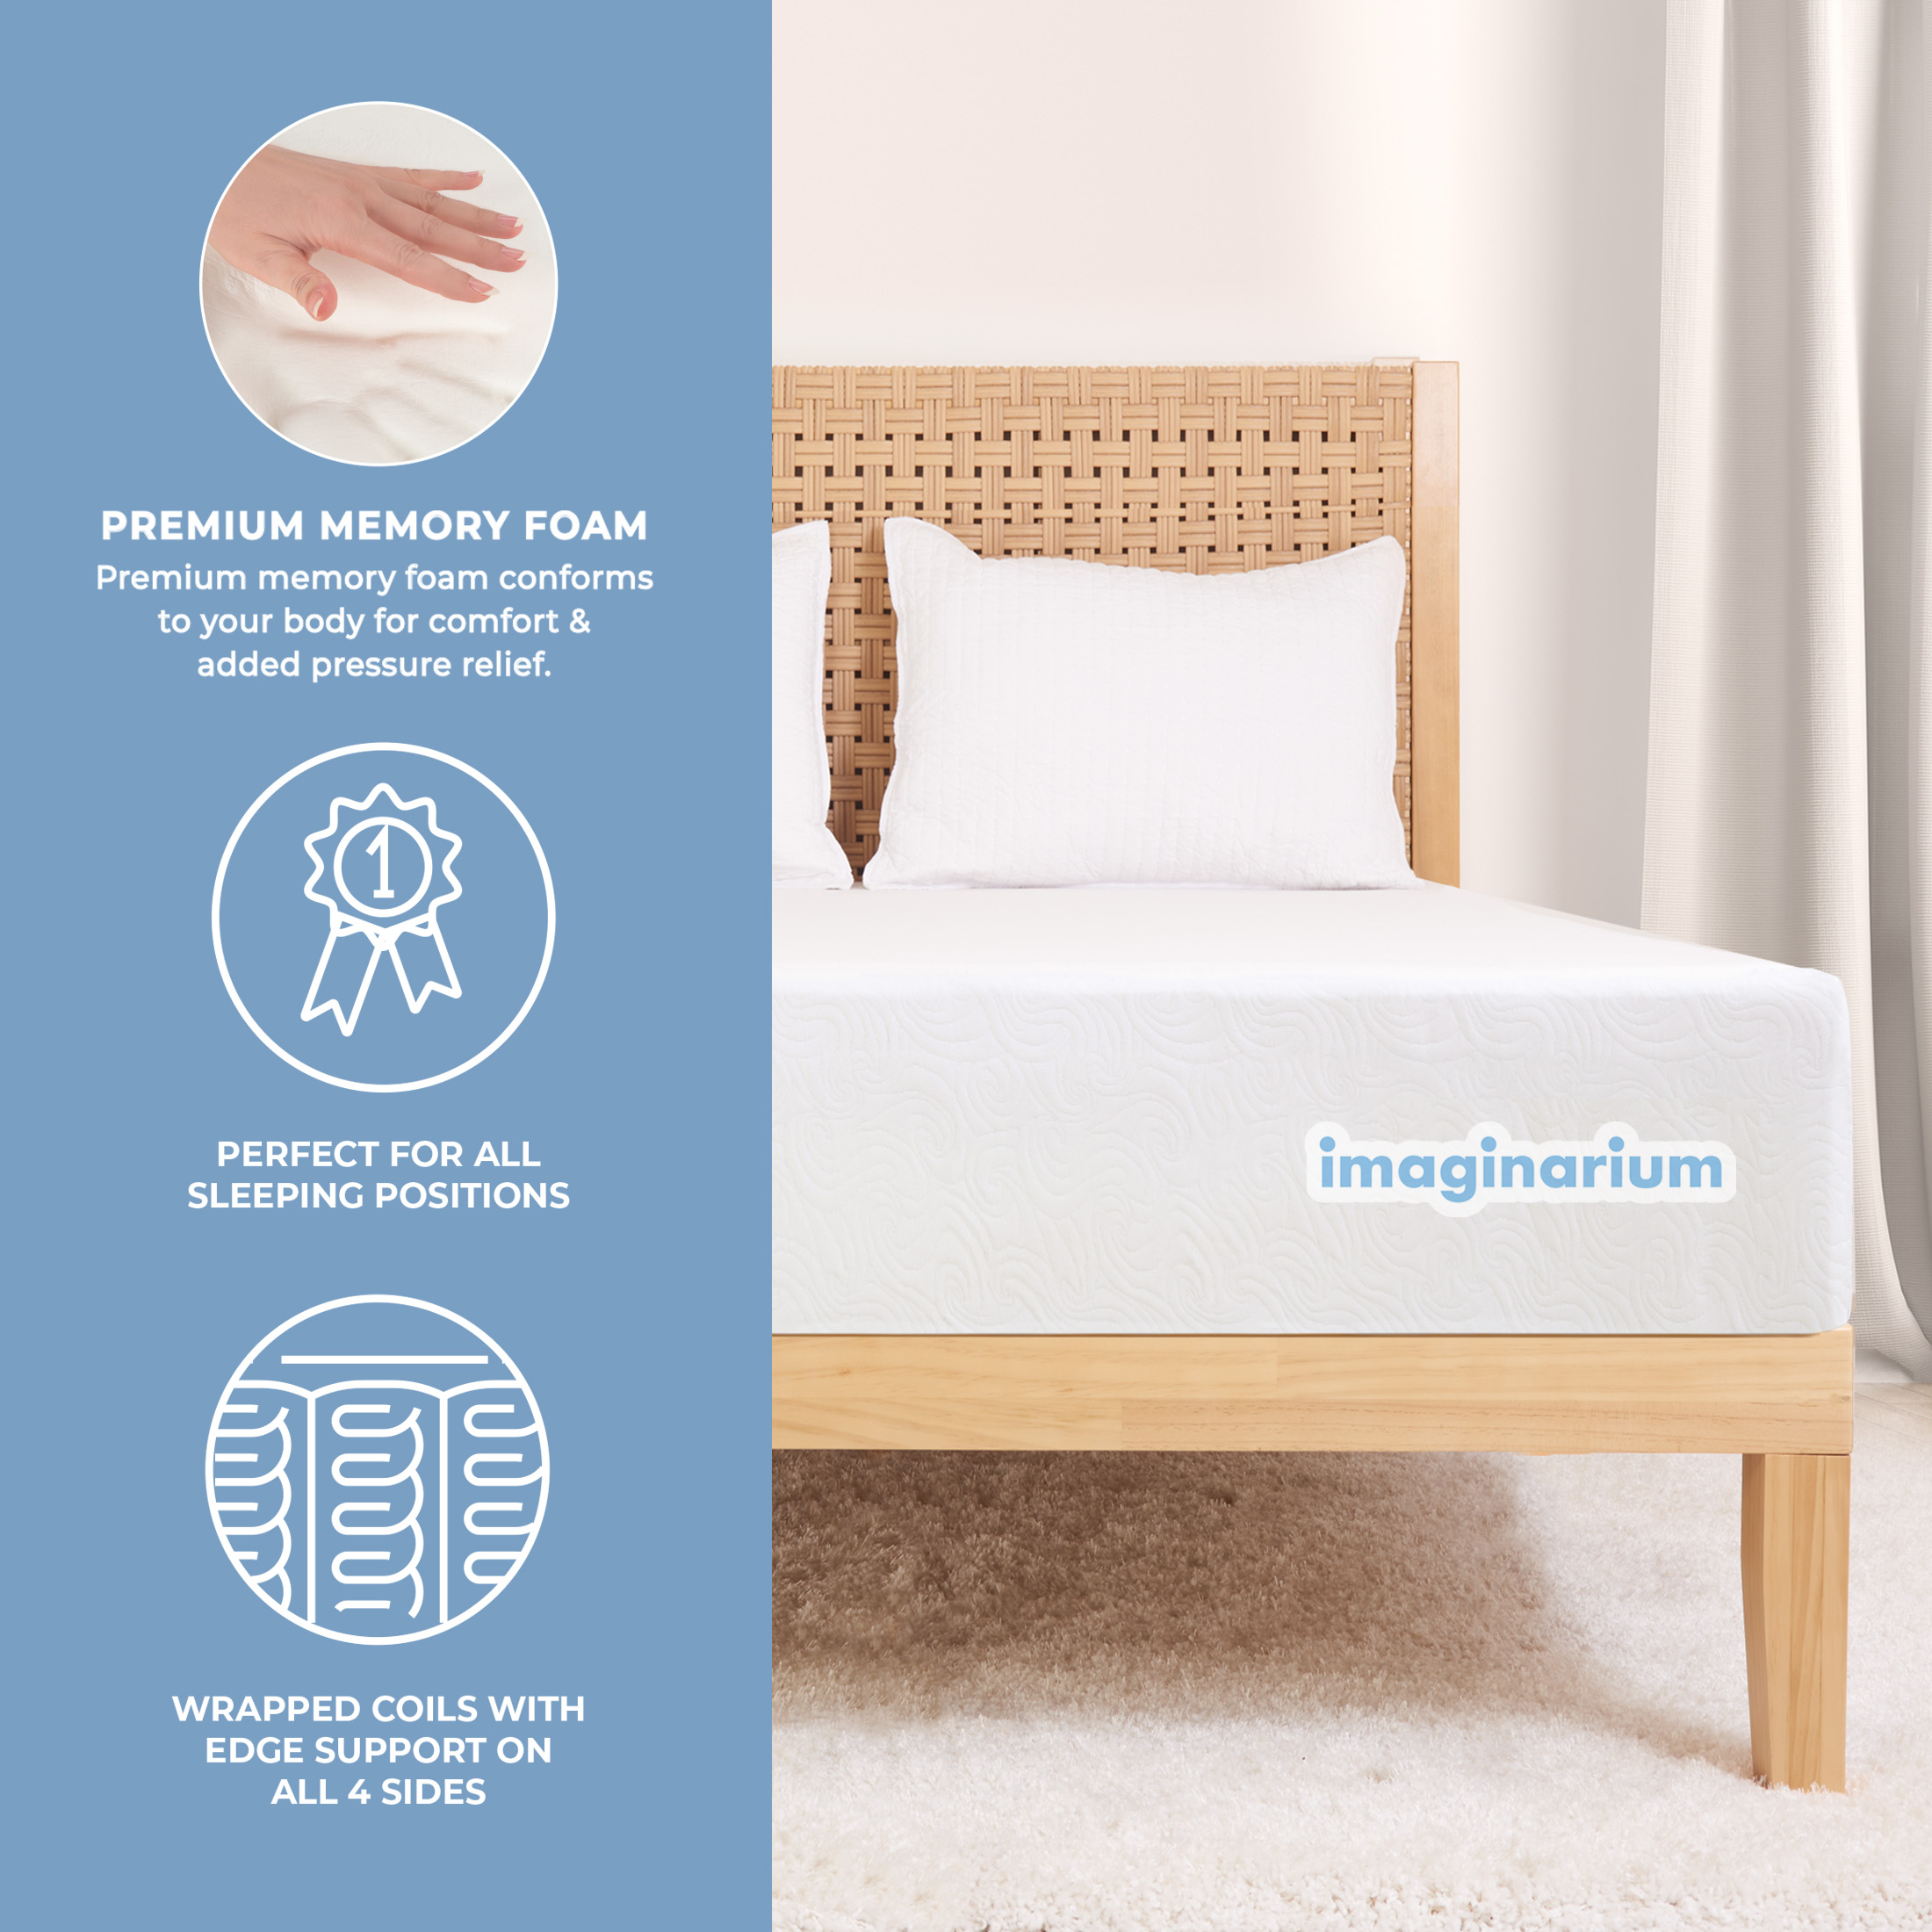 Imaginarium 10" Hybrid of Memory Foam and Coils Mattress with Antimicrobial Treated Cover, King - image 3 of 6